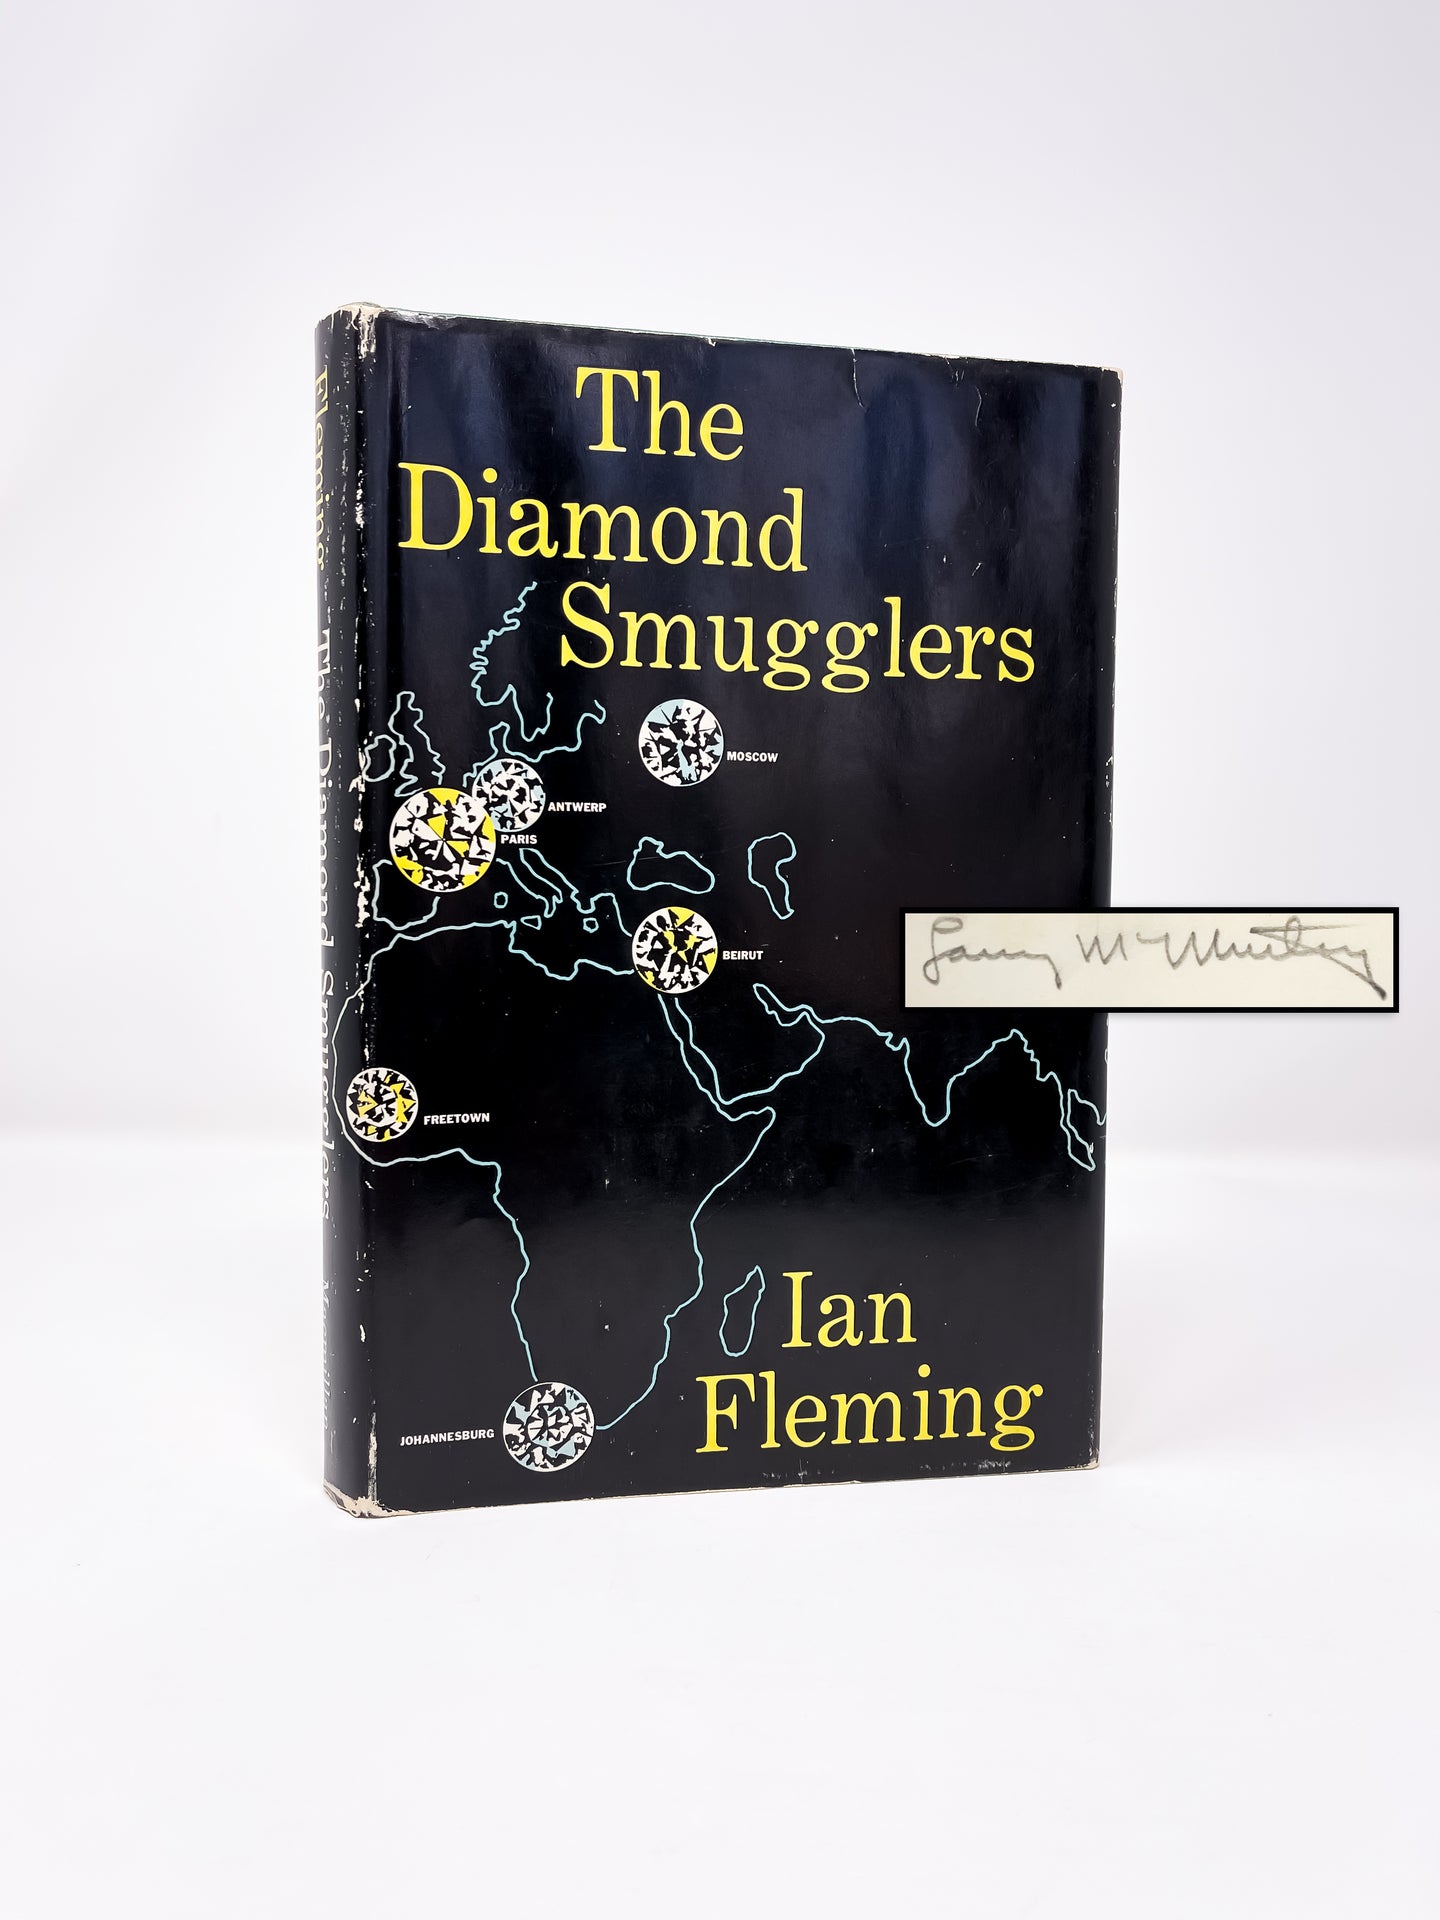 Larry McMurtry's first edition of The Diamond Smugglers by Ian Fleming